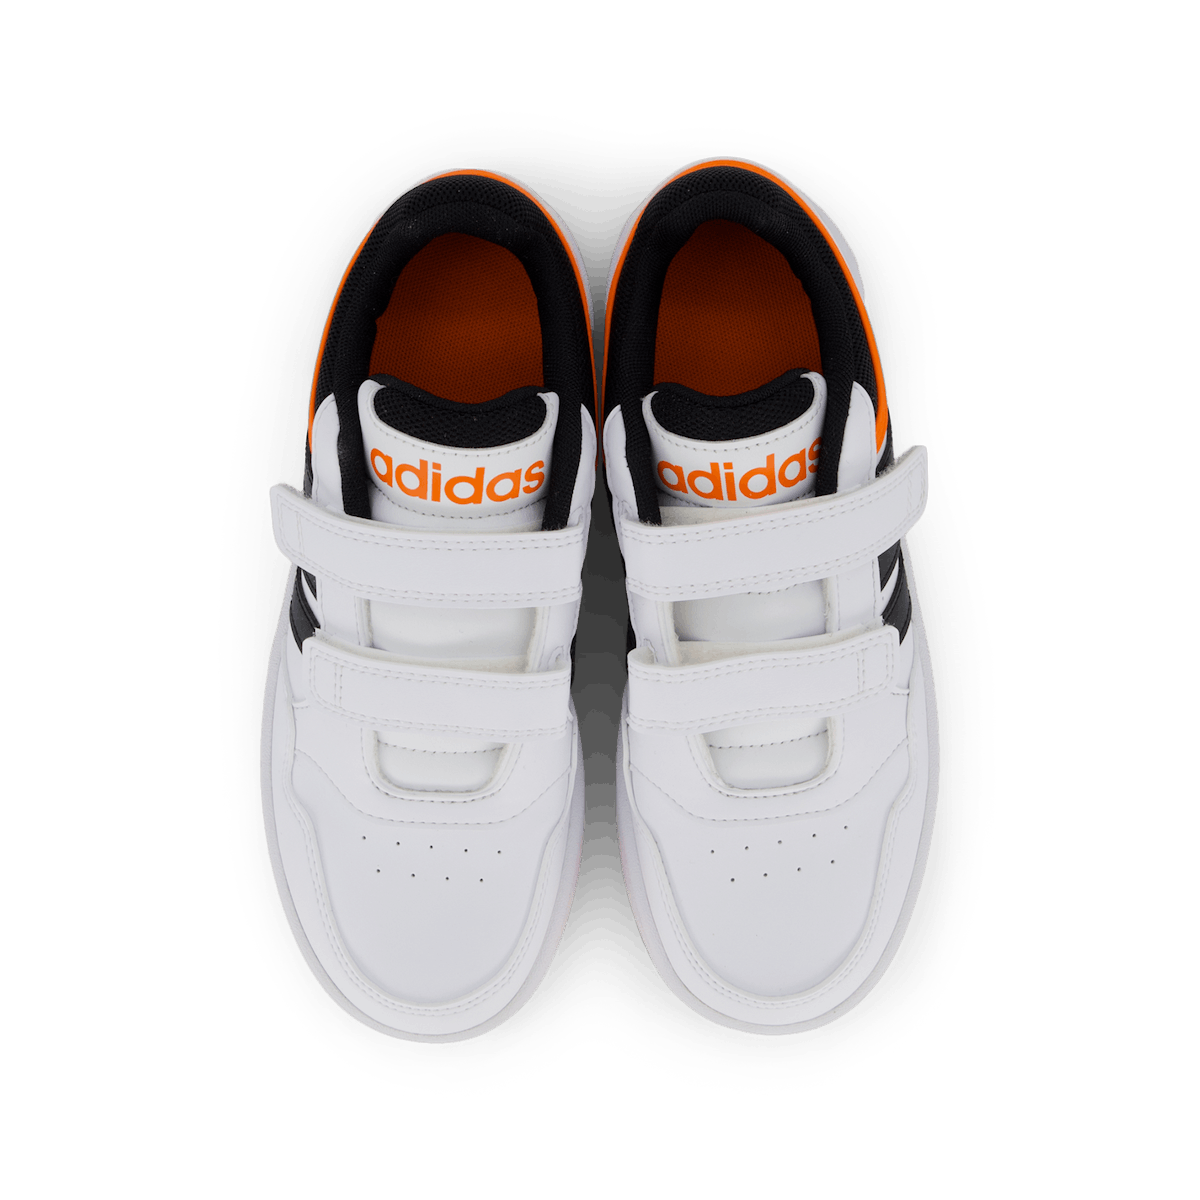 Hoops Lifestyle Basketball Hook-and-Loop Shoes Cloud White / Core Black / Impora